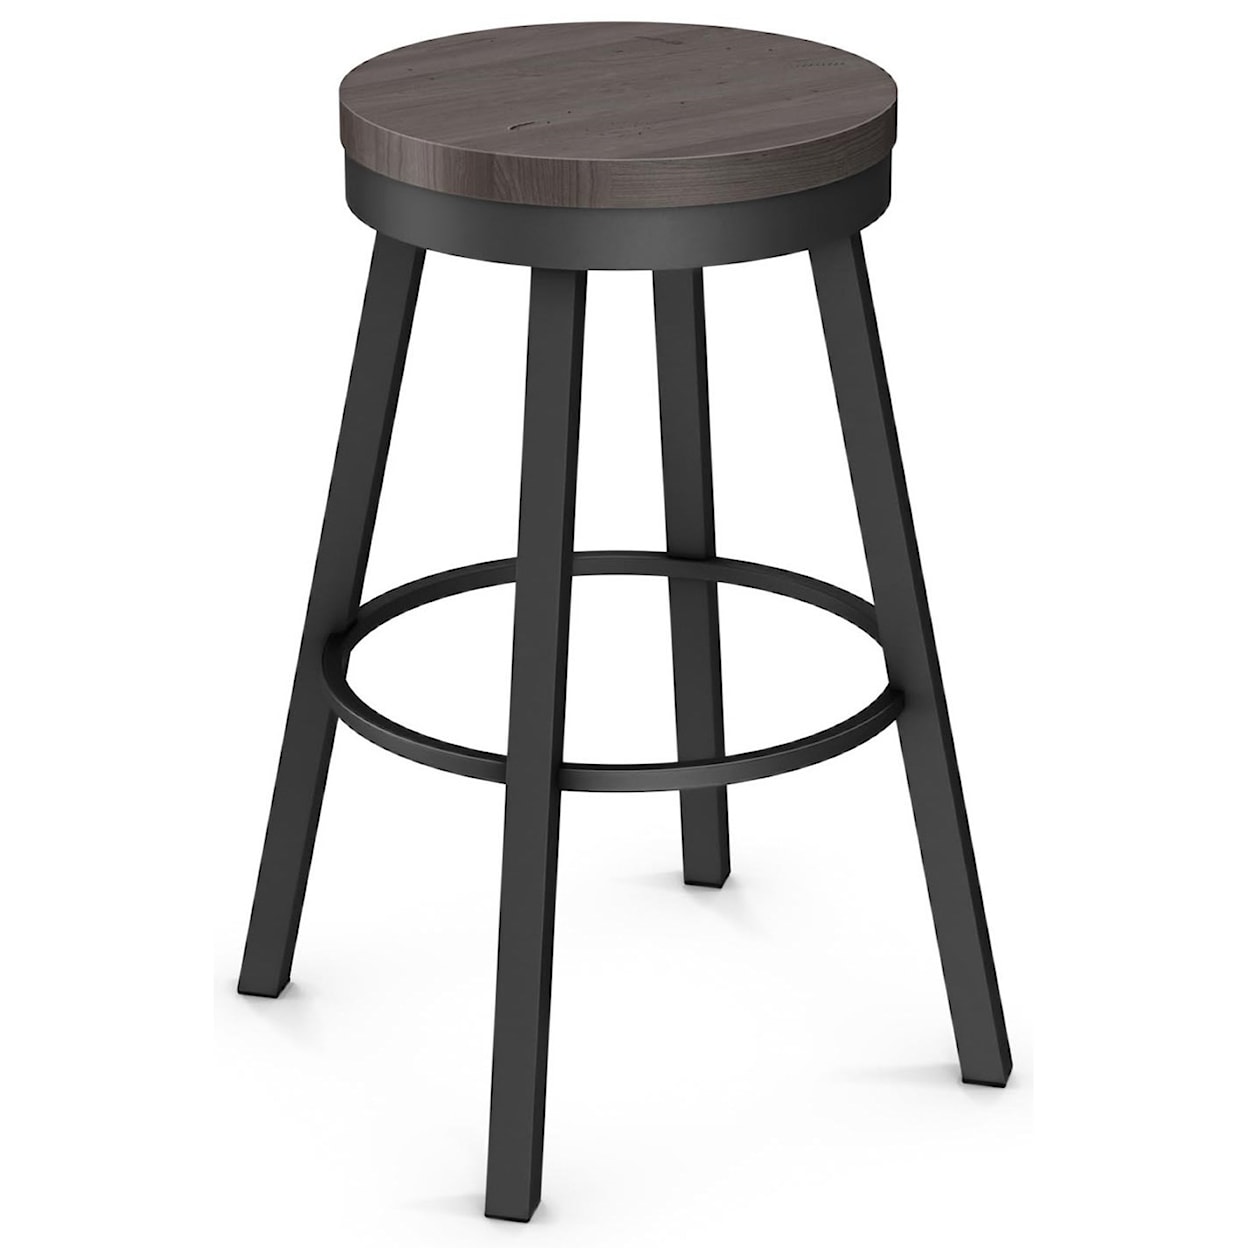 Amisco Industrial 30" Connor Bar Height Swivel Stool